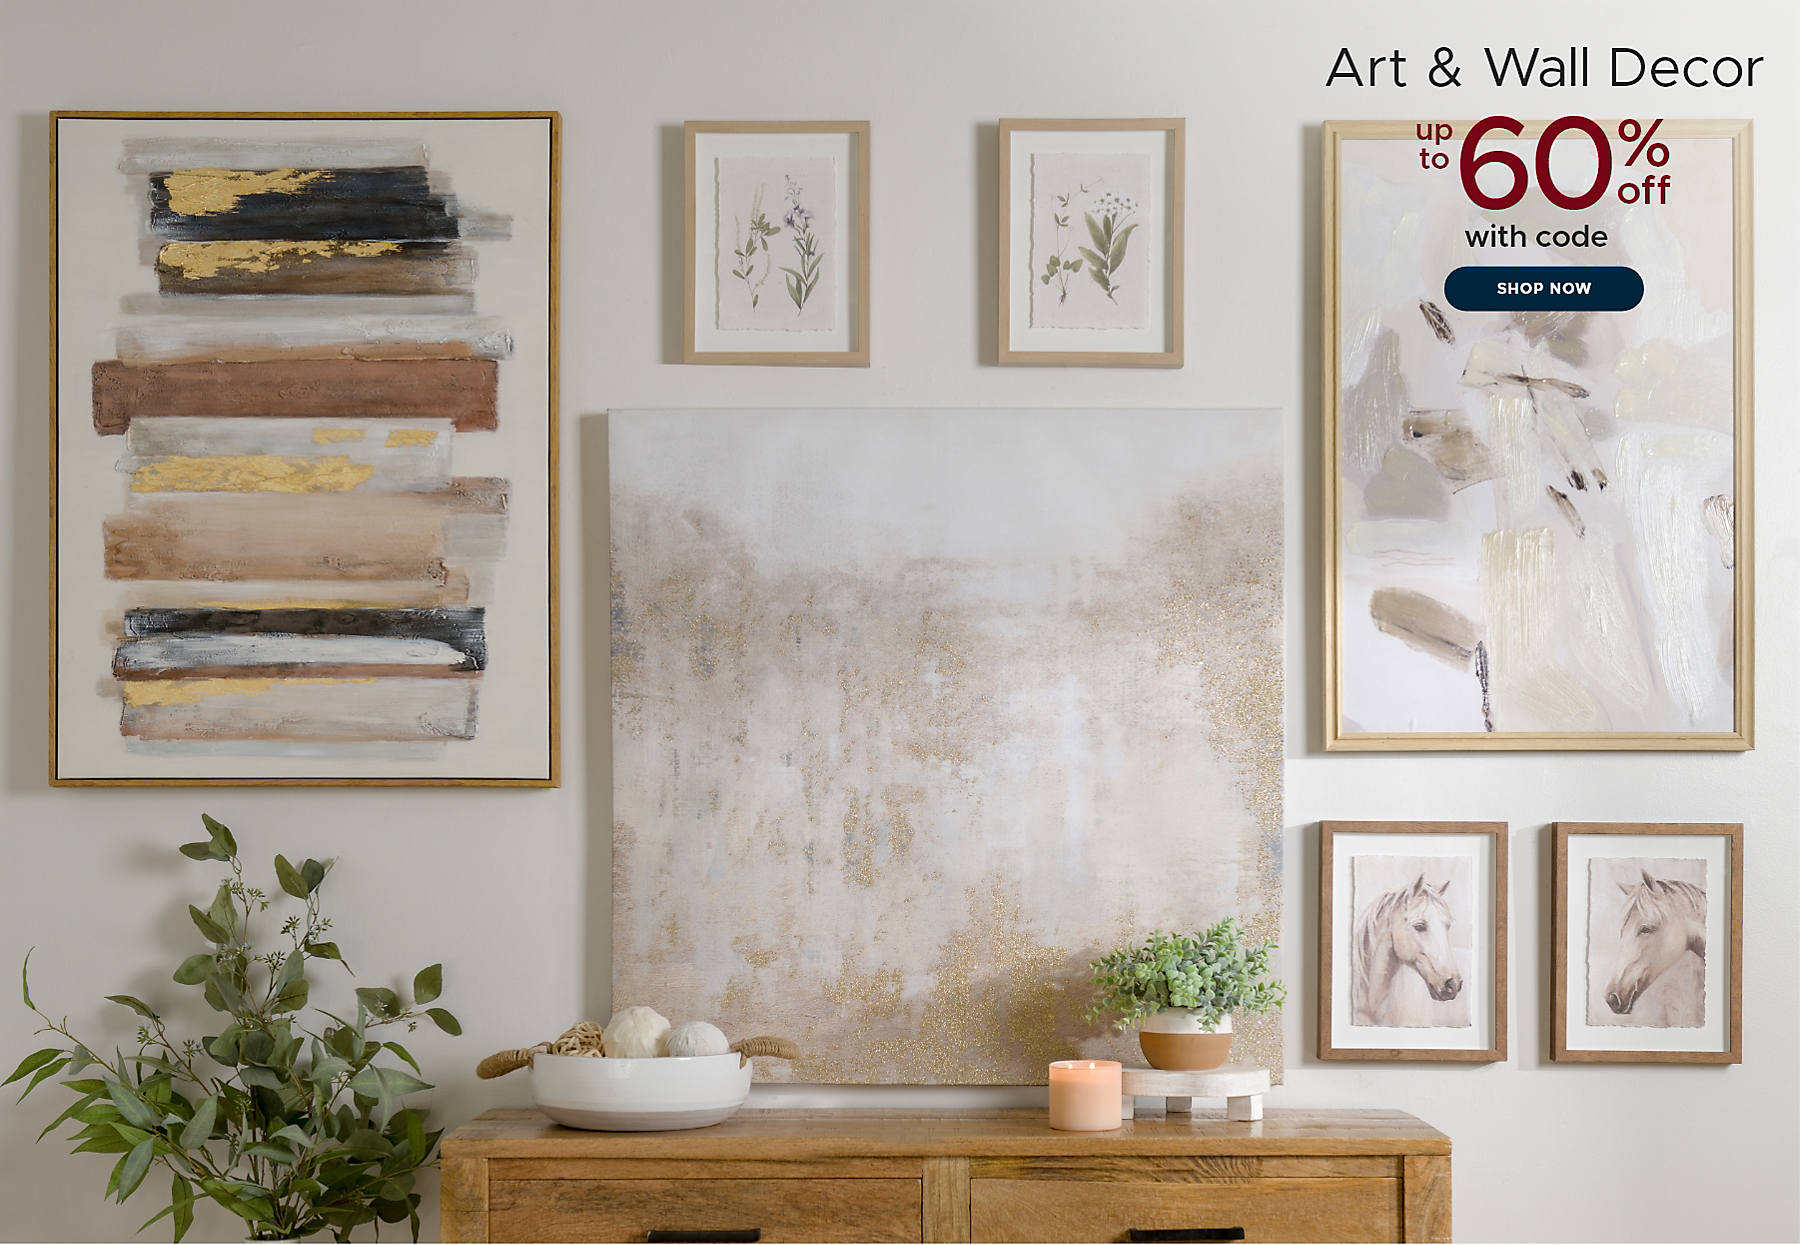 Art & Wall Decor up to 60% off with code shop now